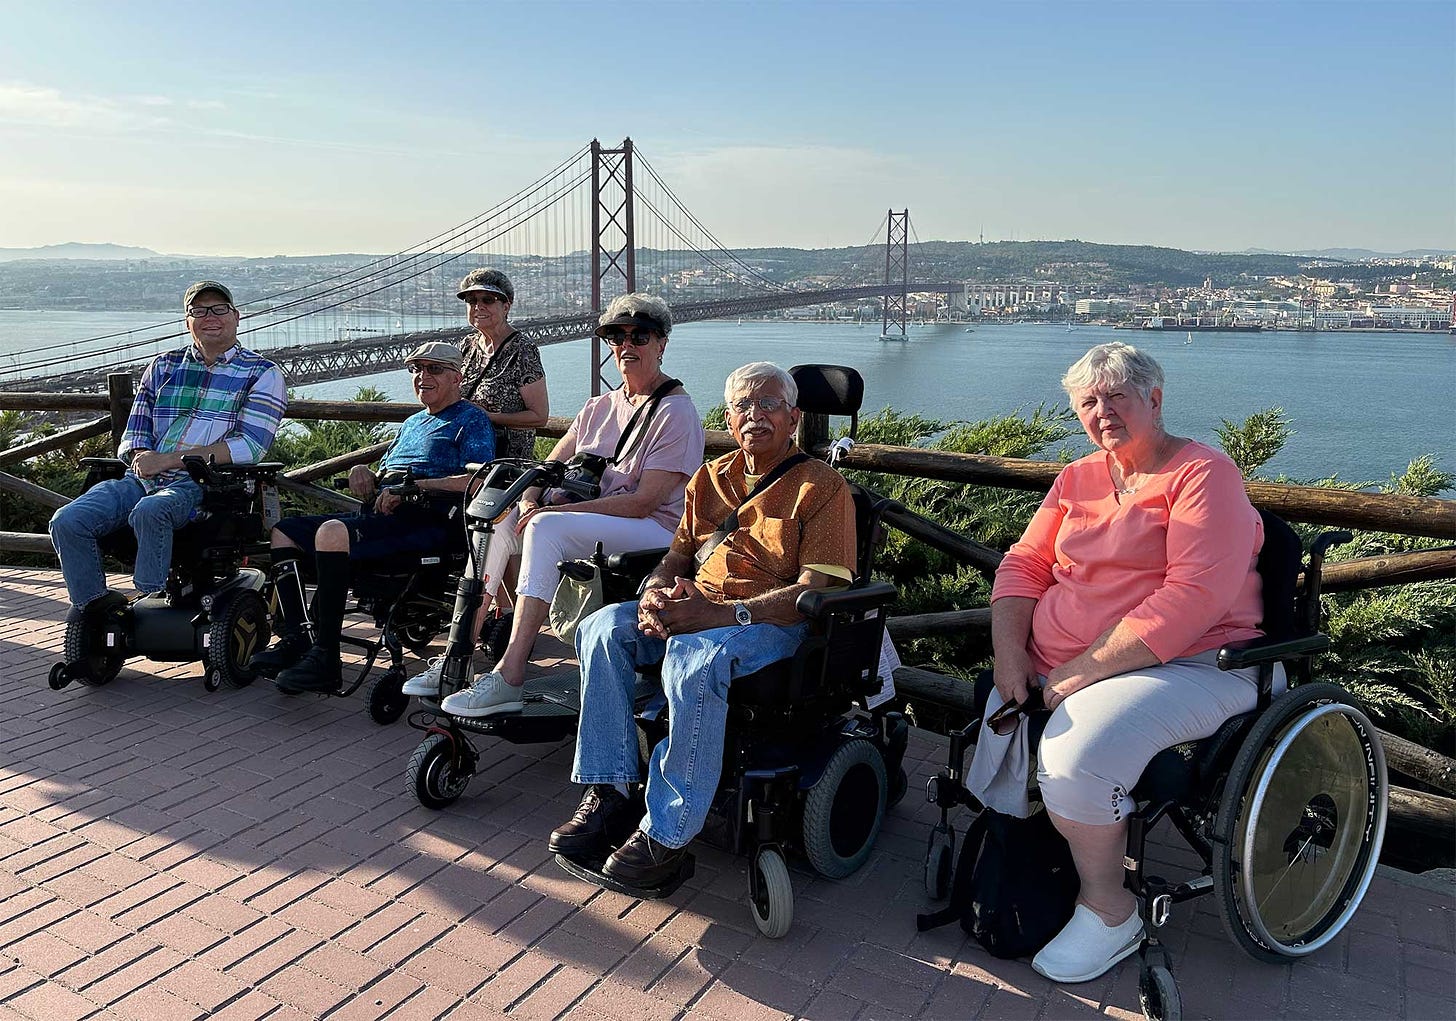 Group of Wheelchair Travel readers with John in front of a bridge styled like the Golden Gate overlooking a large river and the city of Lisbon.